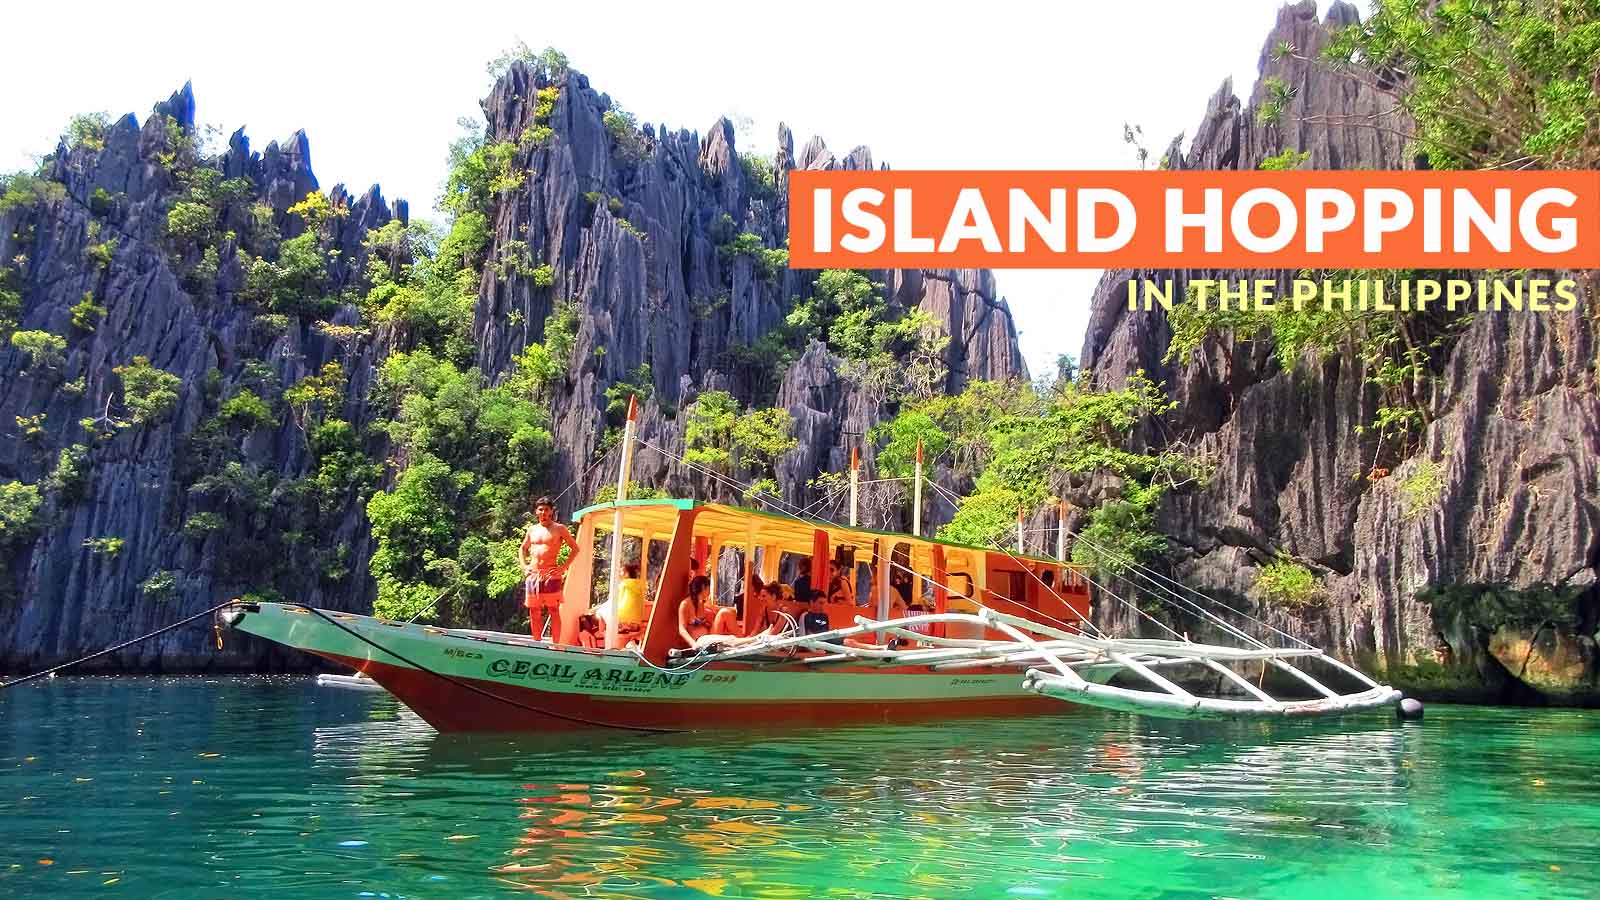 BEST PLACES TO GO ISLAND HOPPING IN THE PHILIPPINES - Philippine Beach Guide